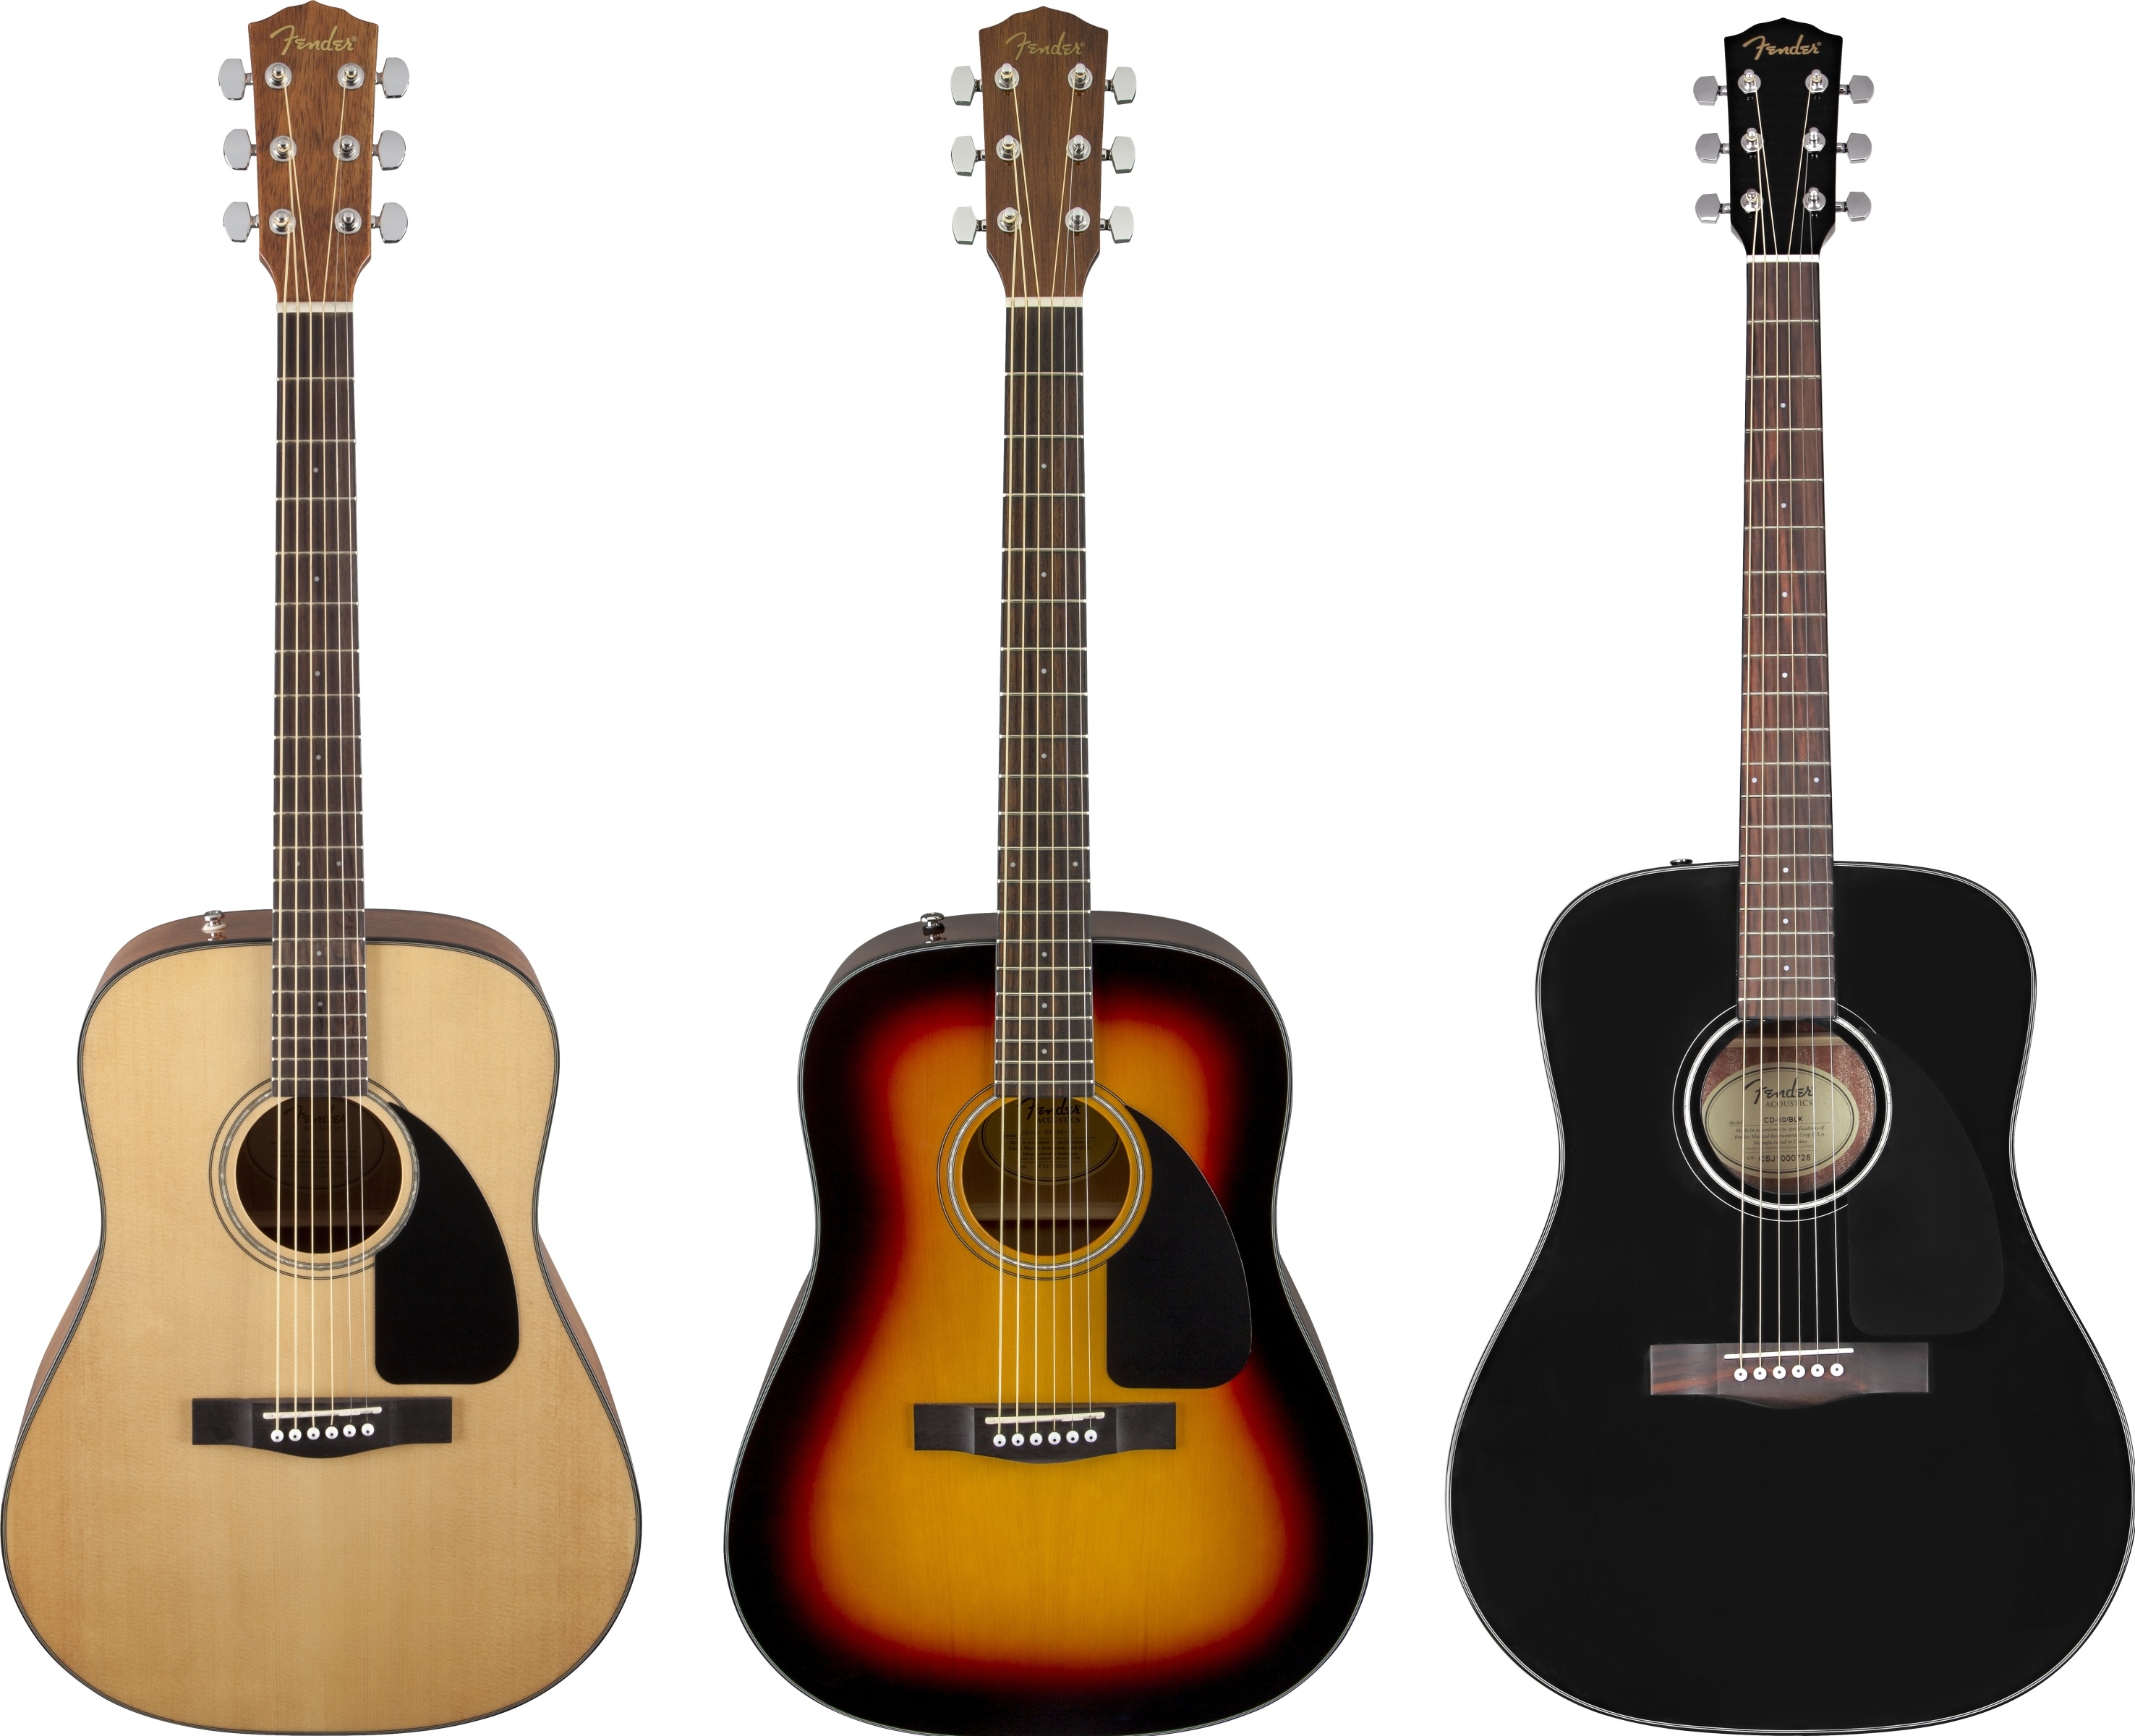 Fender CD-60 colors available